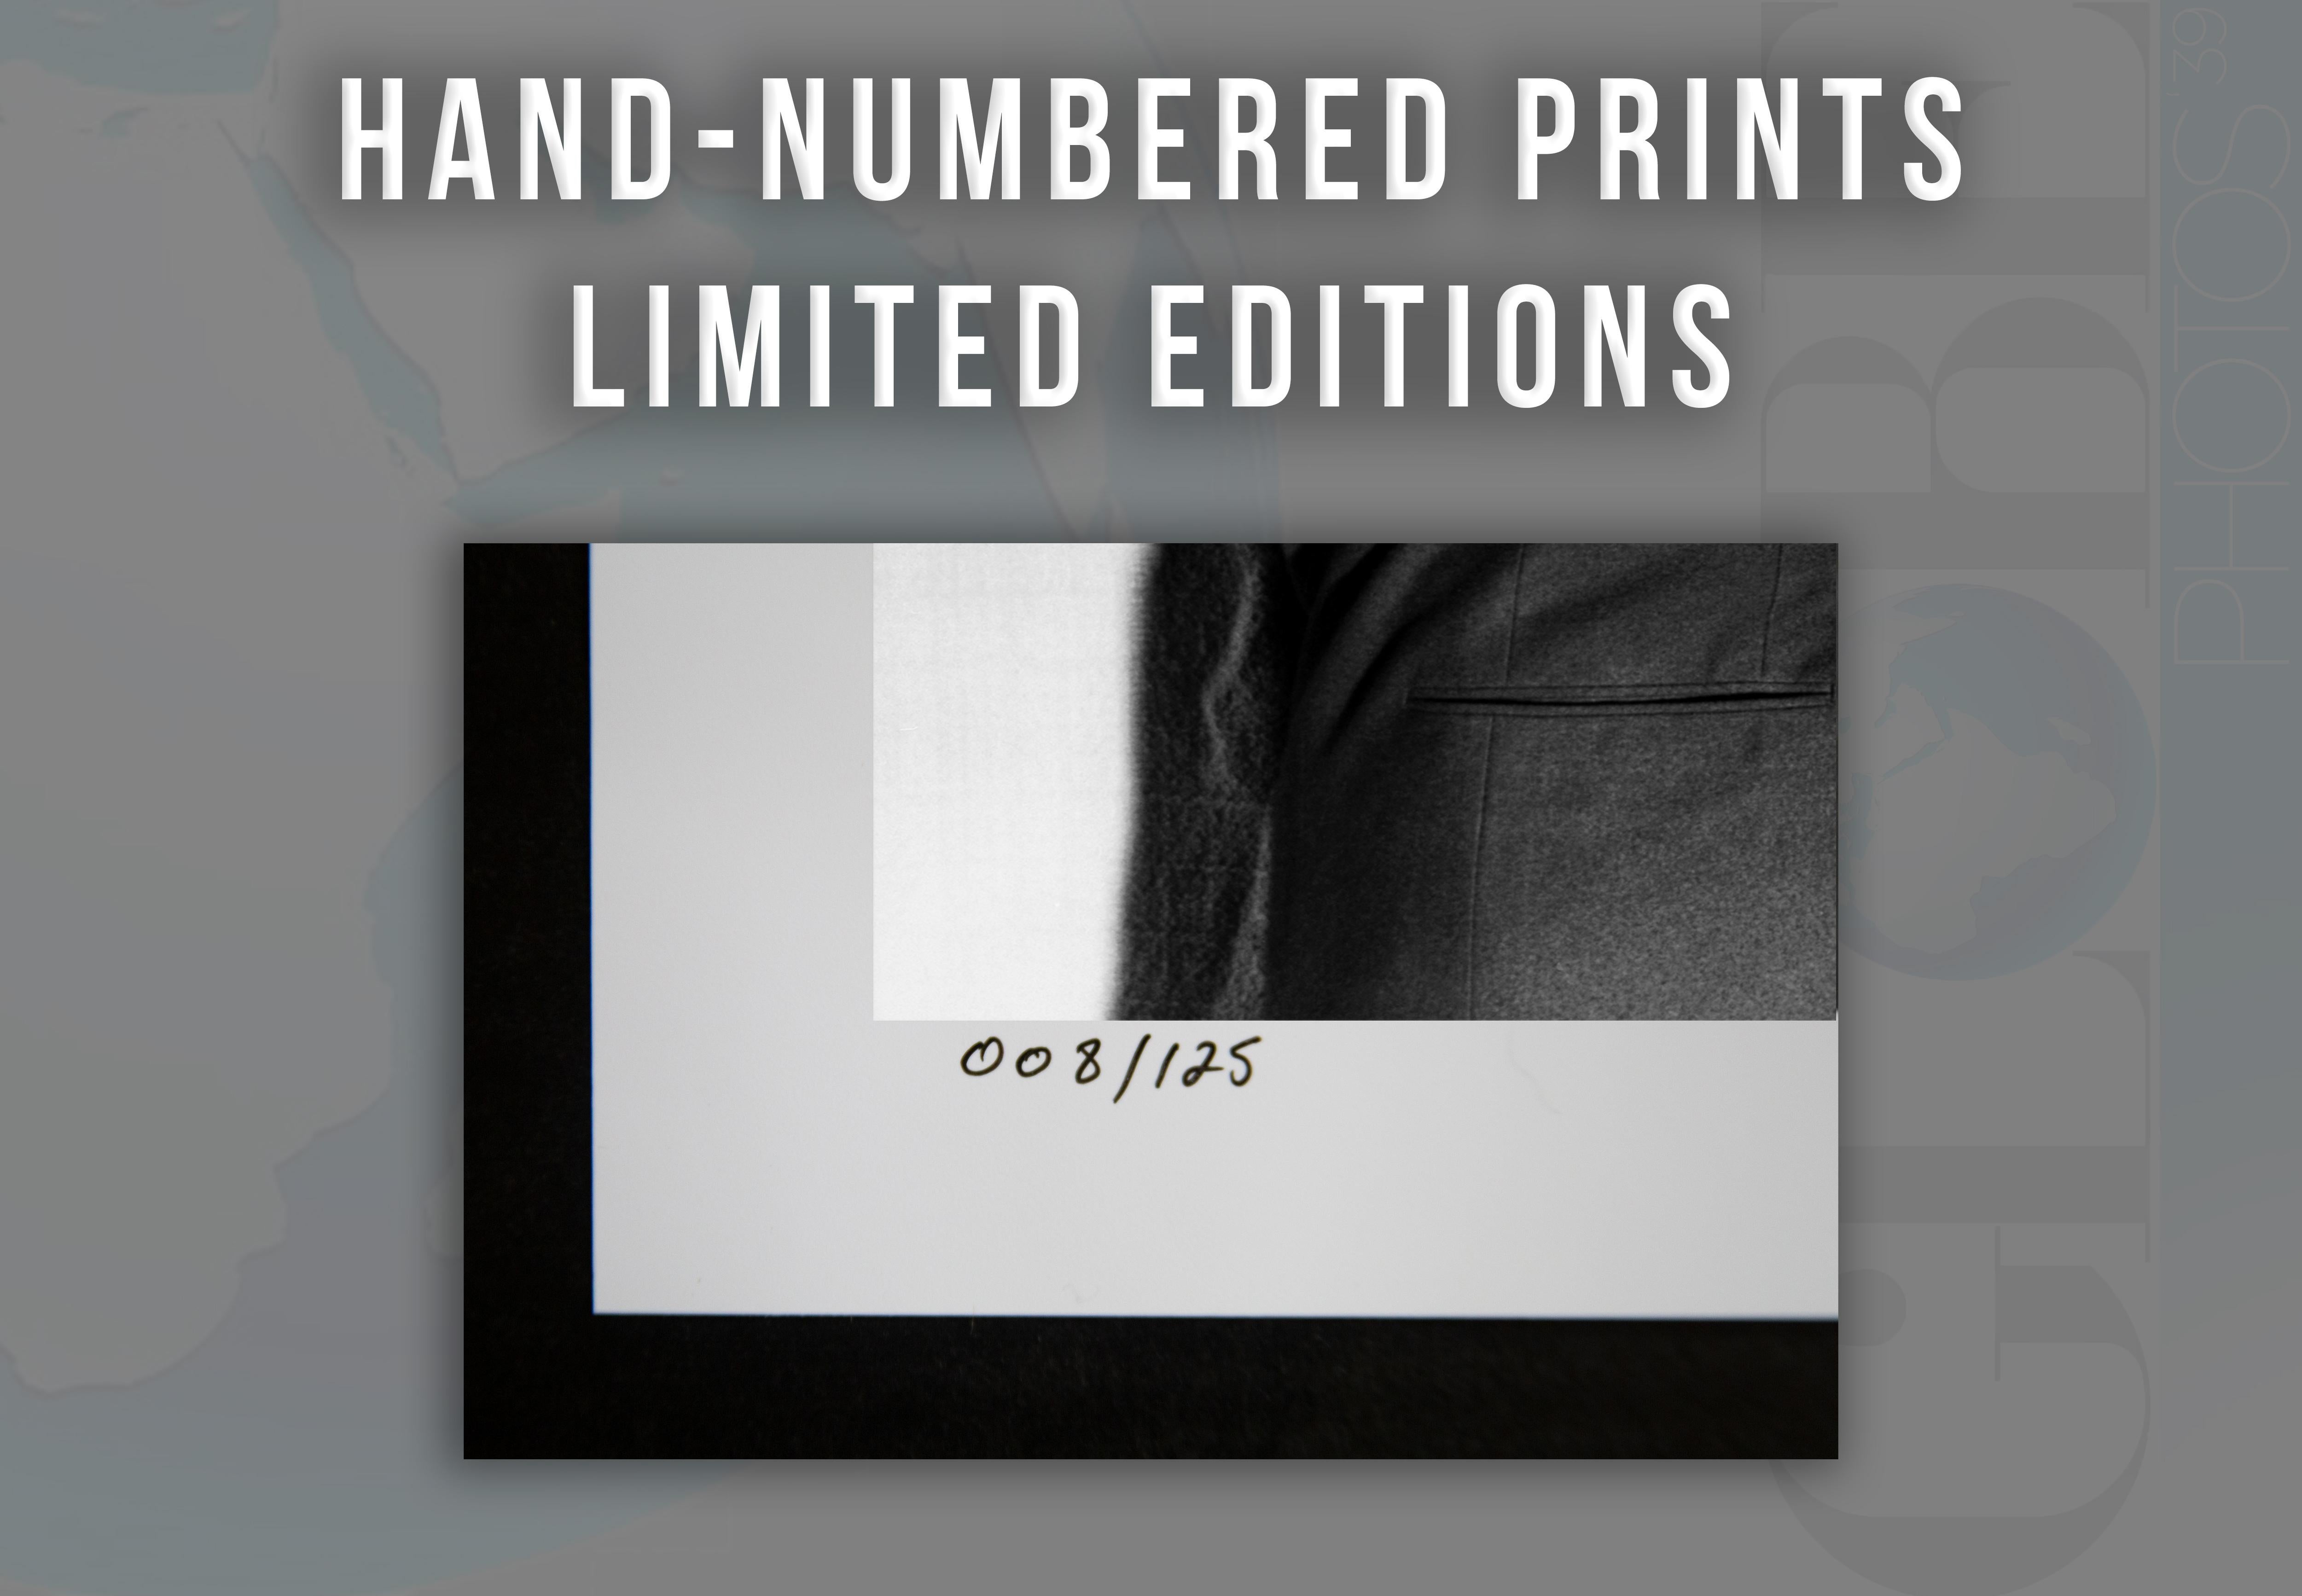 This black and white portrait by photographer Frank Wort features Alan Ladd & Humphrey Bogart in suits grabbing one another.

This image is credited to Globe Photos.

This is a limited edition fine art C-Print, hand numbered out of an edition of 125